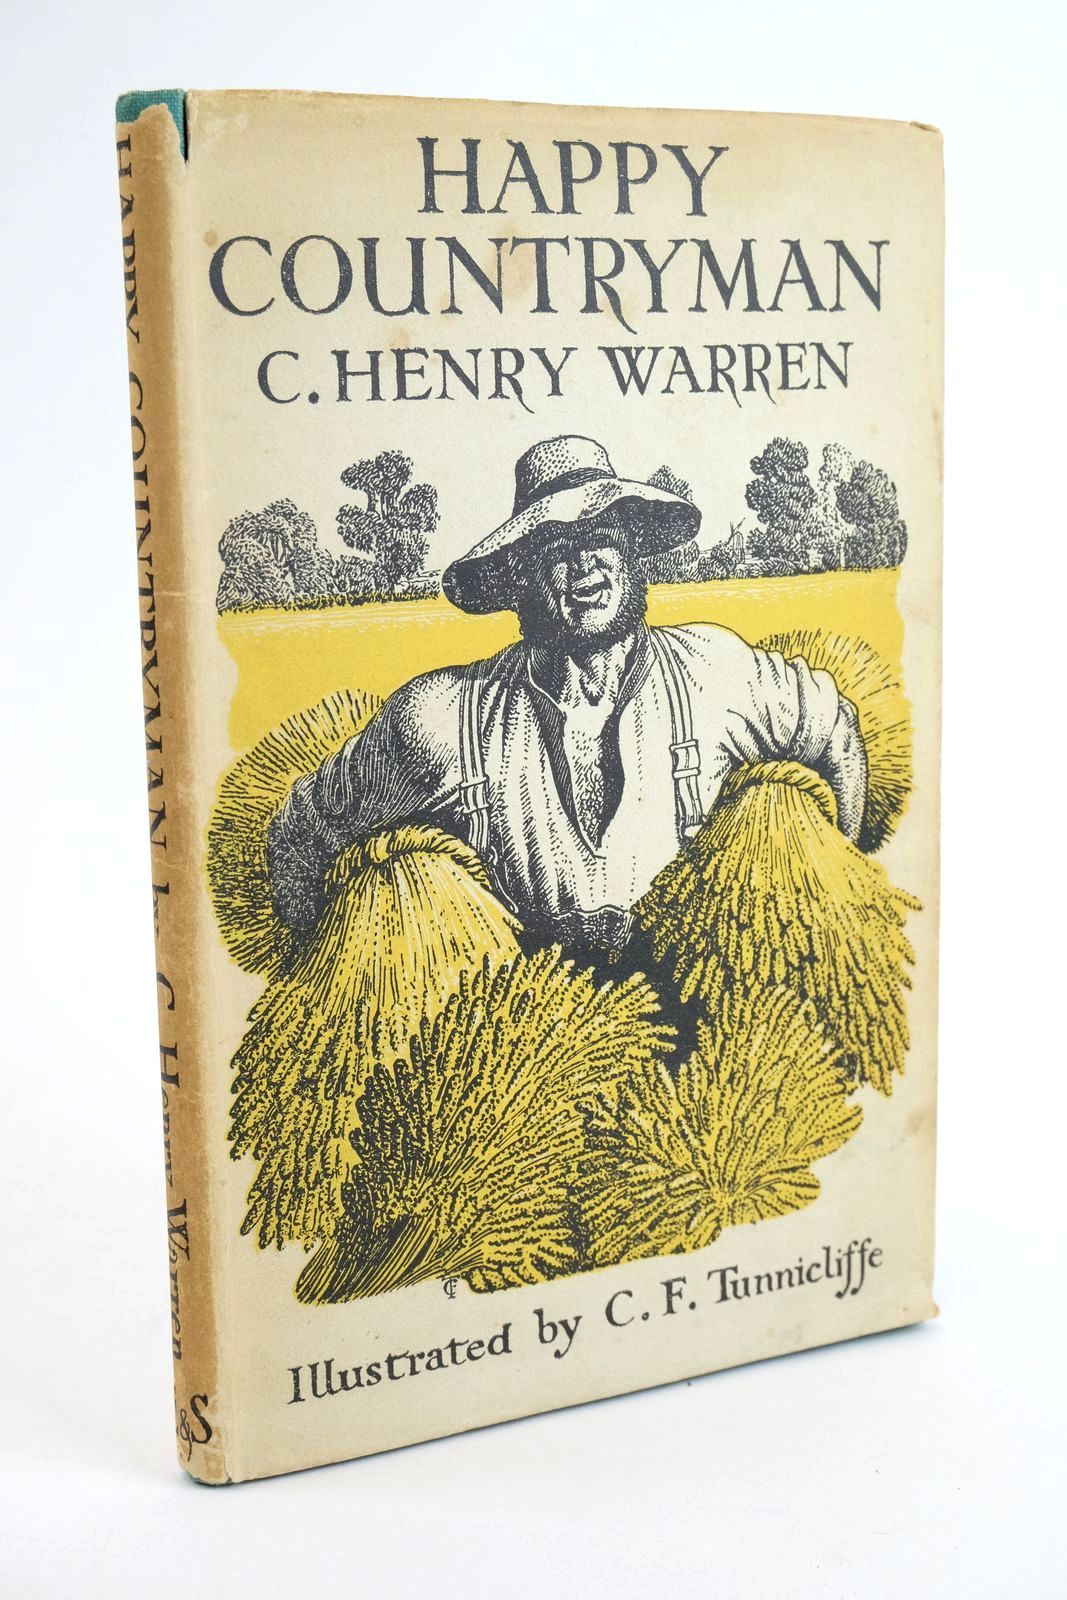 Photo of HAPPY COUNTRYMAN written by Warren, C. Henry illustrated by Tunnicliffe, C.F. published by Eyre &amp; Spottiswoode (STOCK CODE: 1323739)  for sale by Stella & Rose's Books